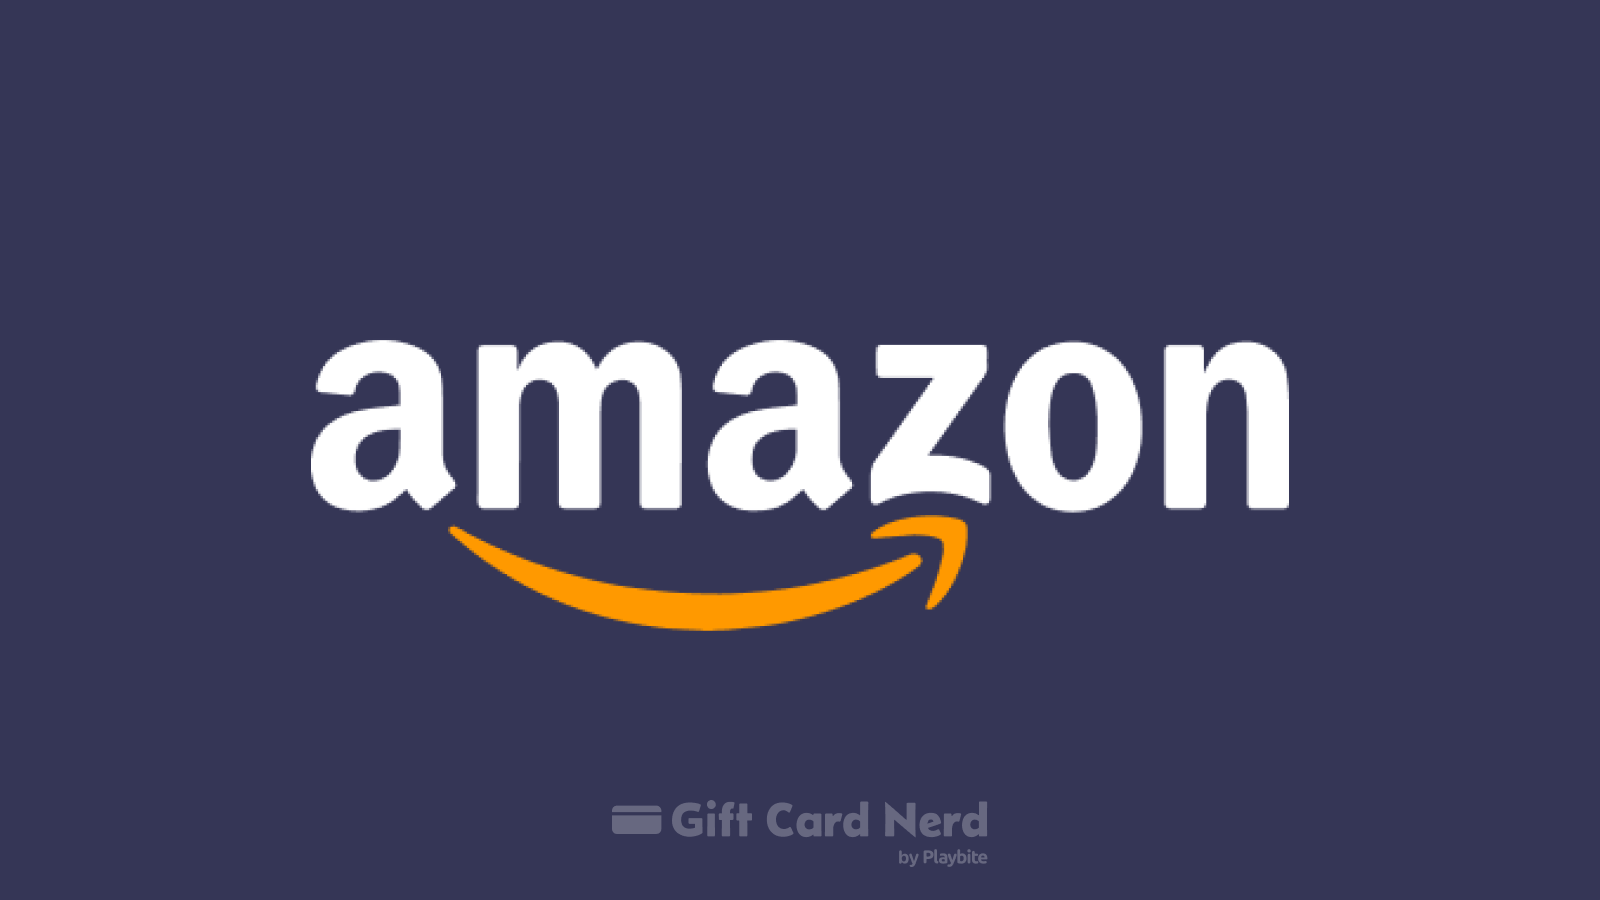 Can I Use an Amazon Gift Card on Apple Wallet?